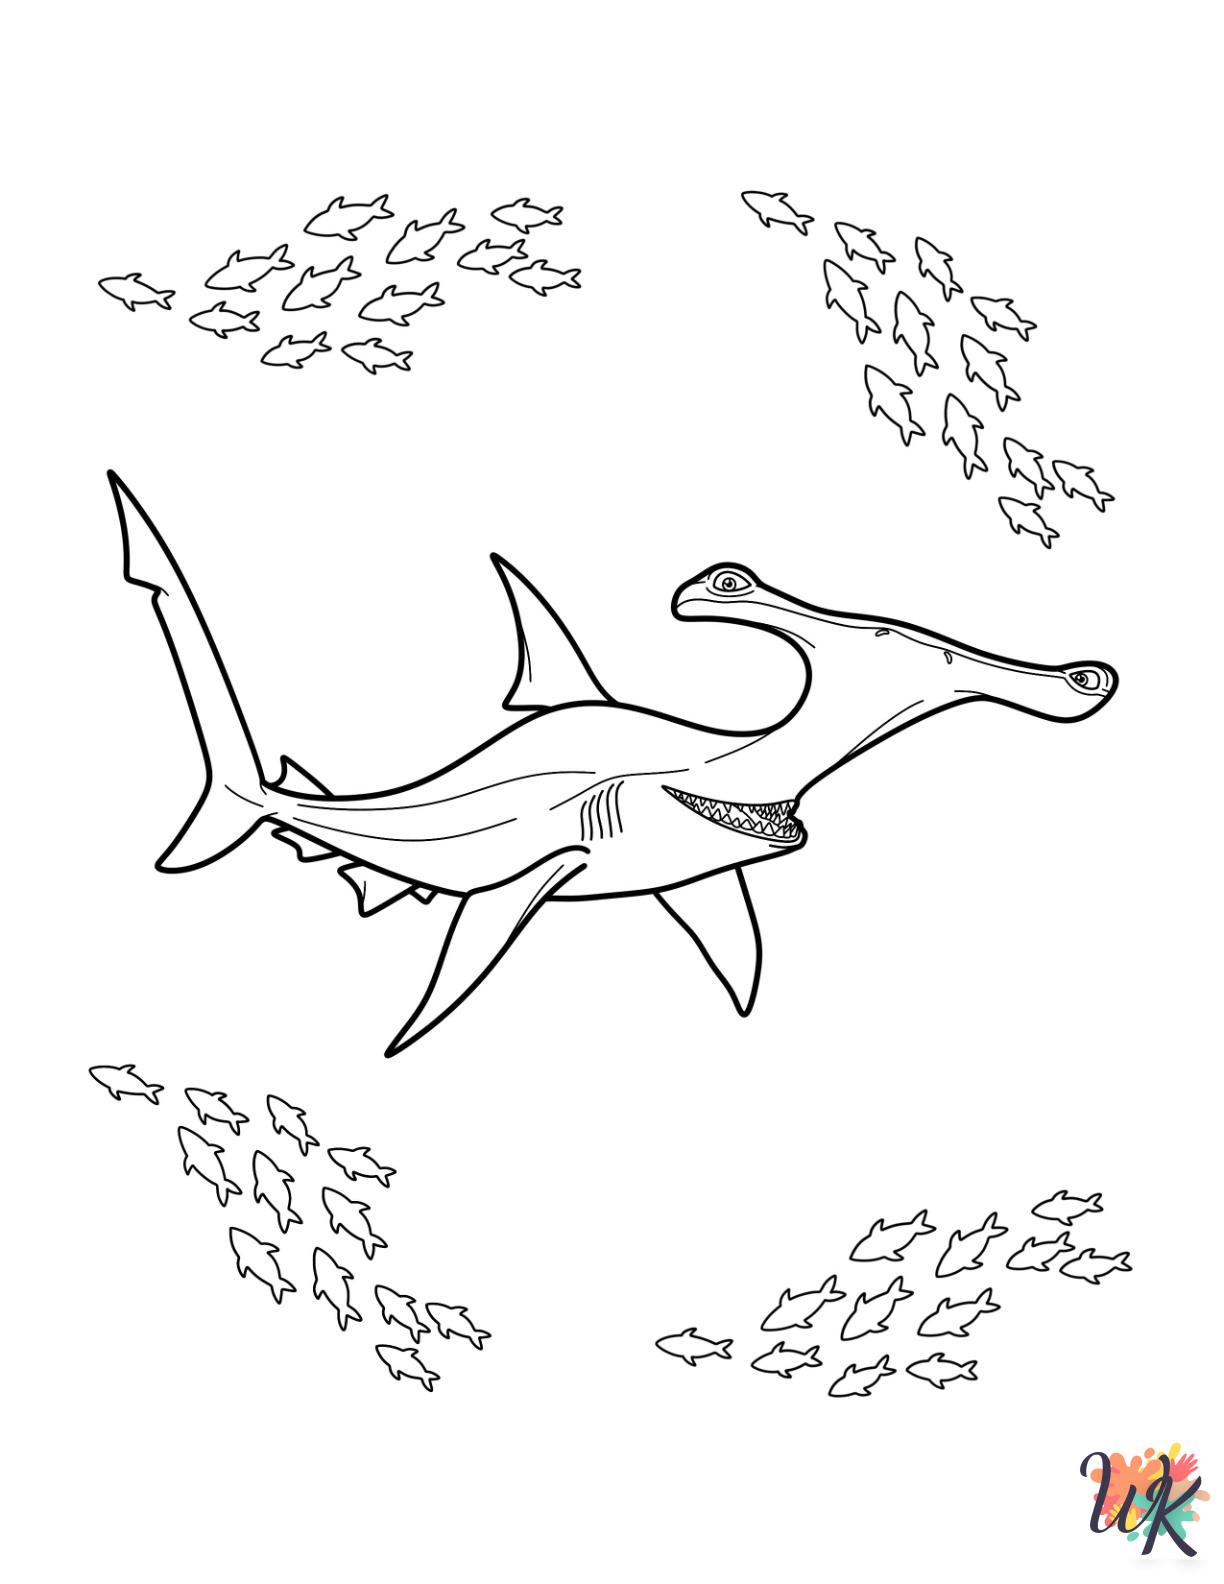 Hammerhead Shark coloring pages for adults pdf